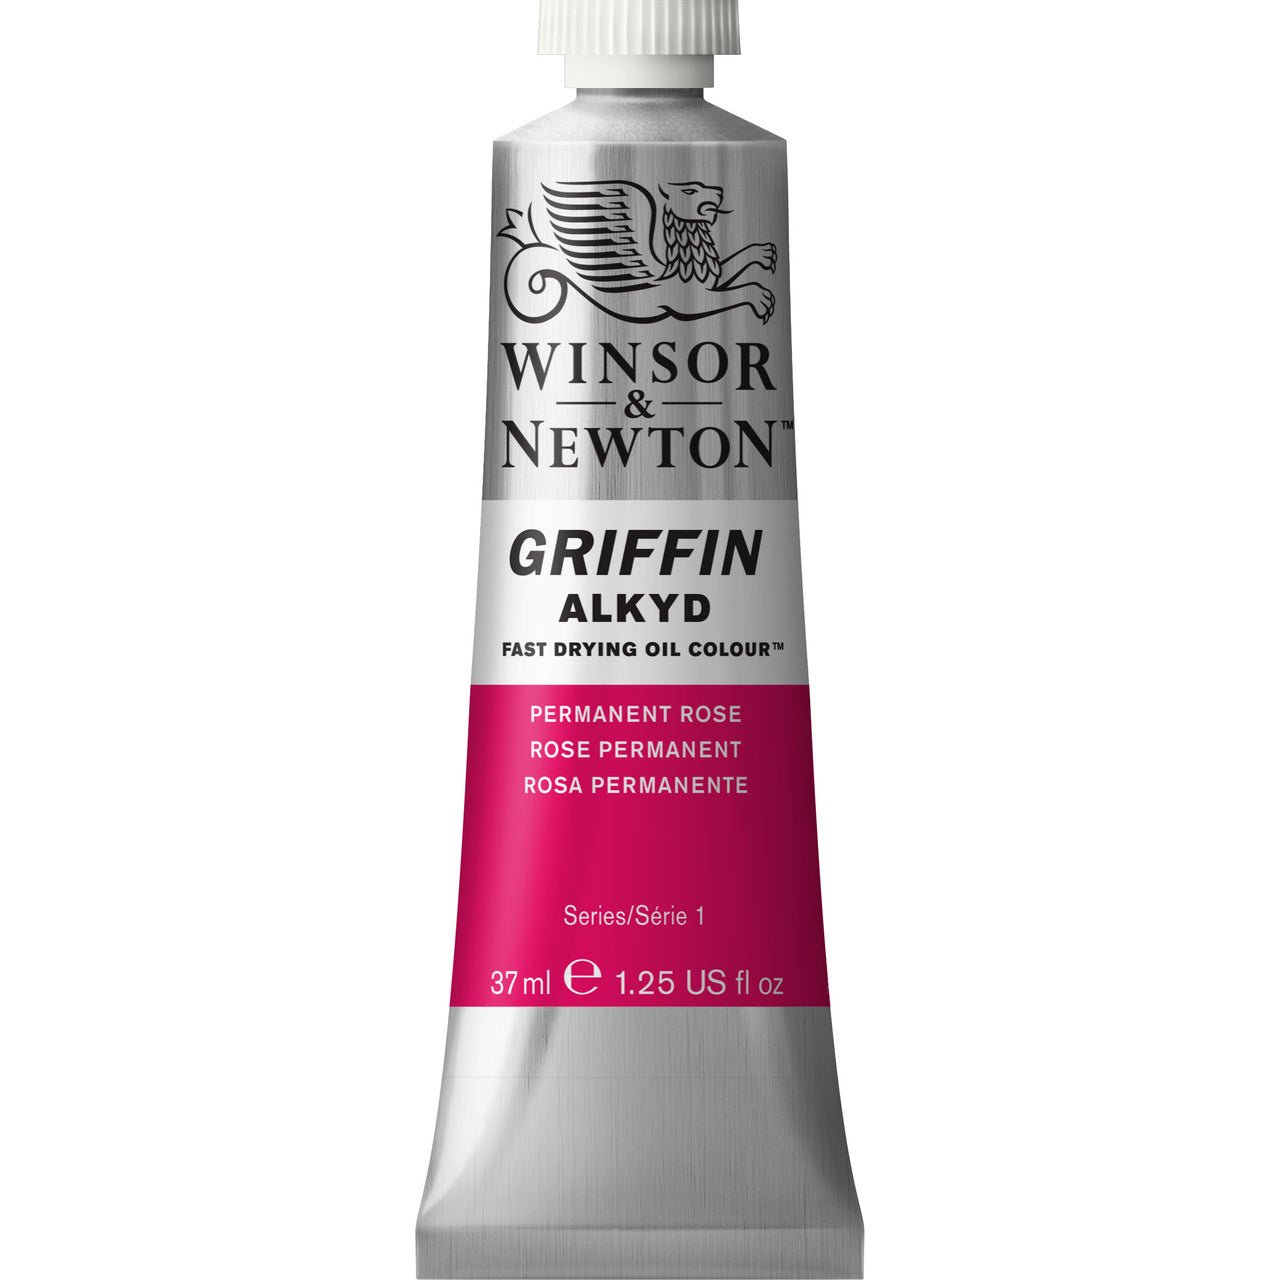 Winsor & Newton Griffin Alkyd 37ml Permanent Rose - merriartist.com